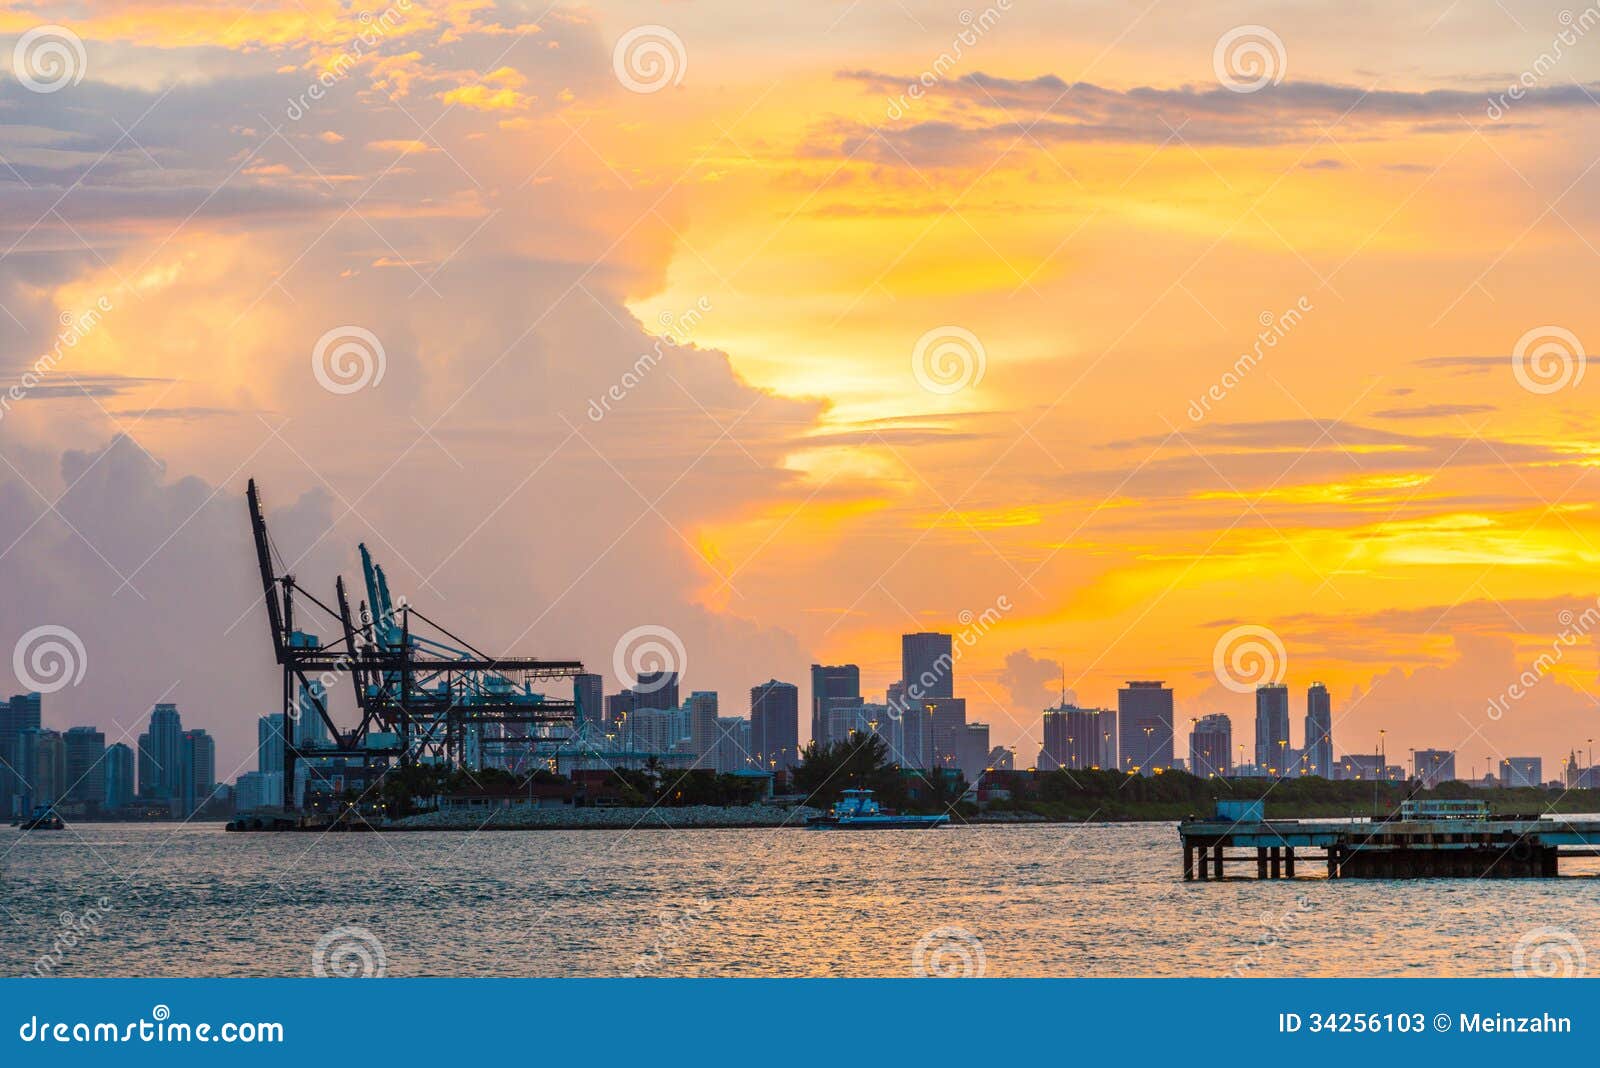 View To the Skyline of Miami with Docks in the Foreground at Sunset ...